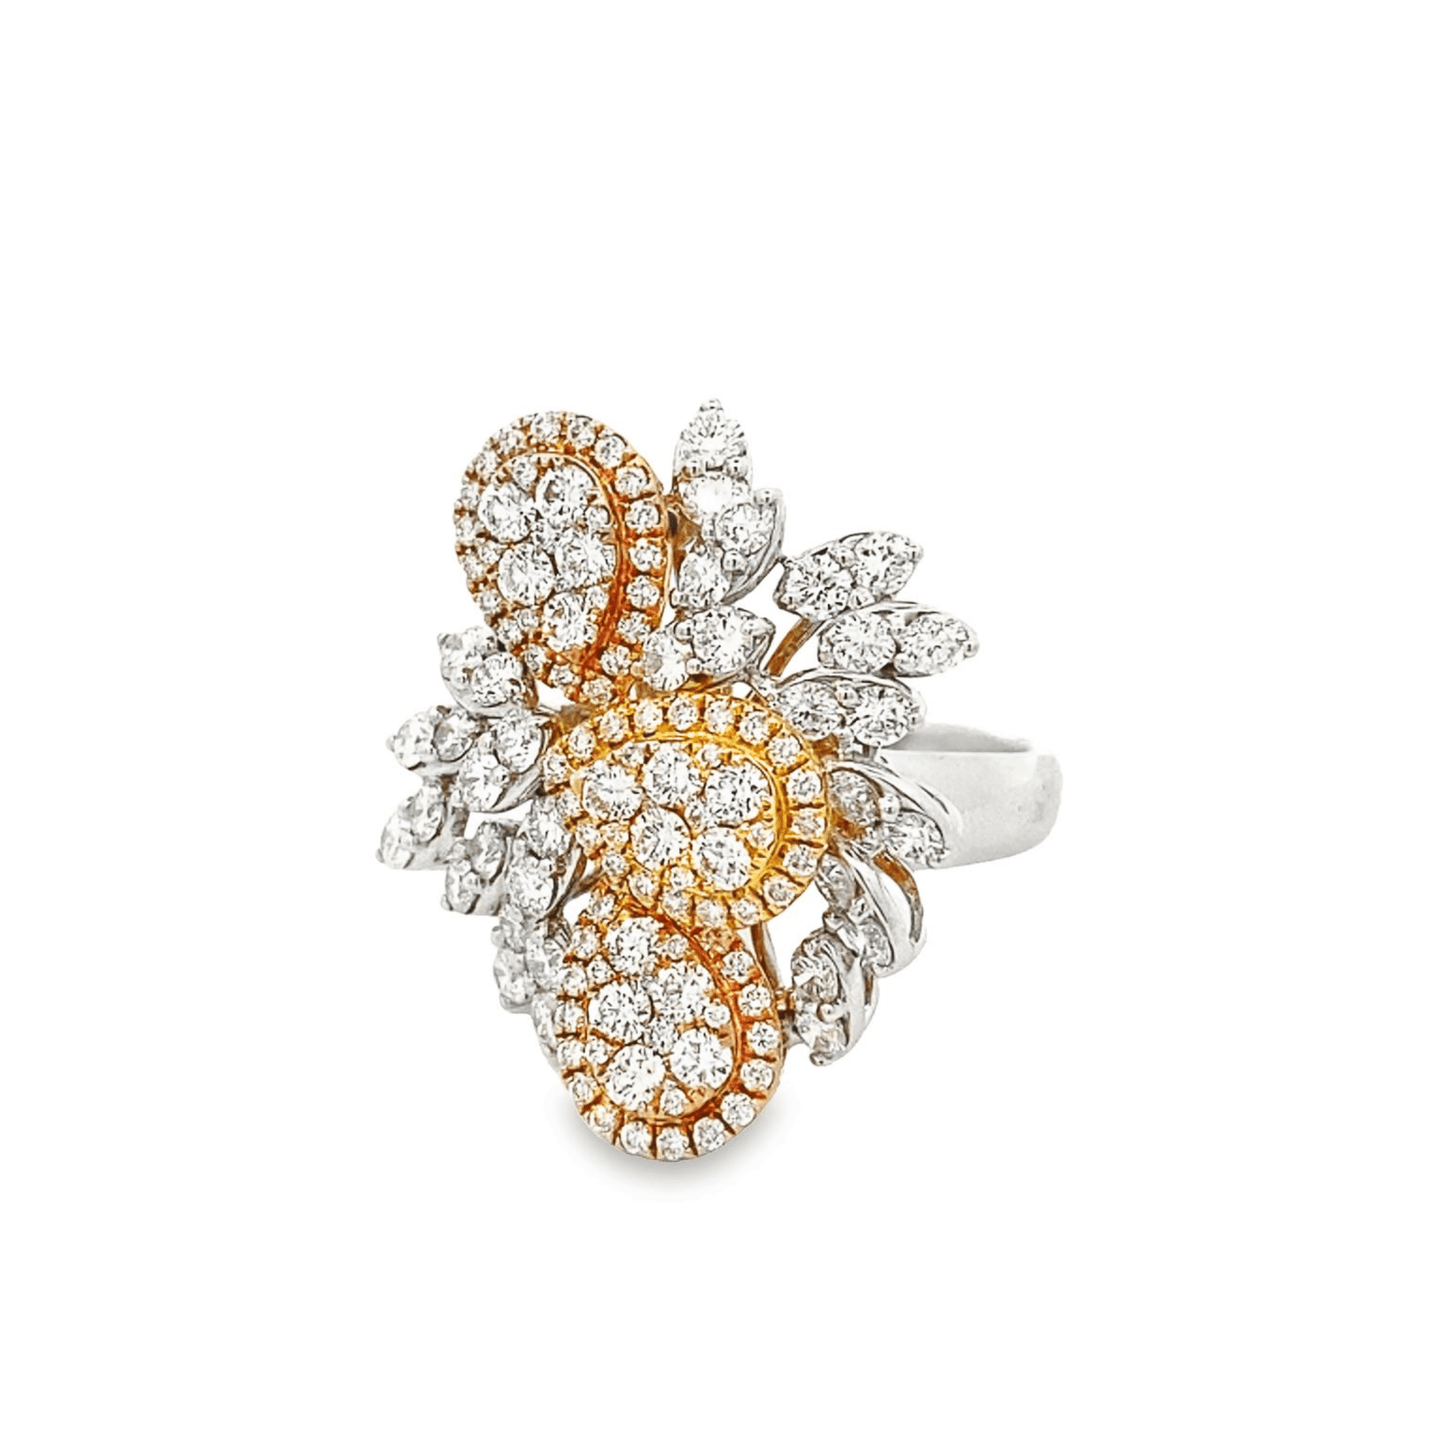 Ring diamond multi clusters tri-color - Gaines Jewelers